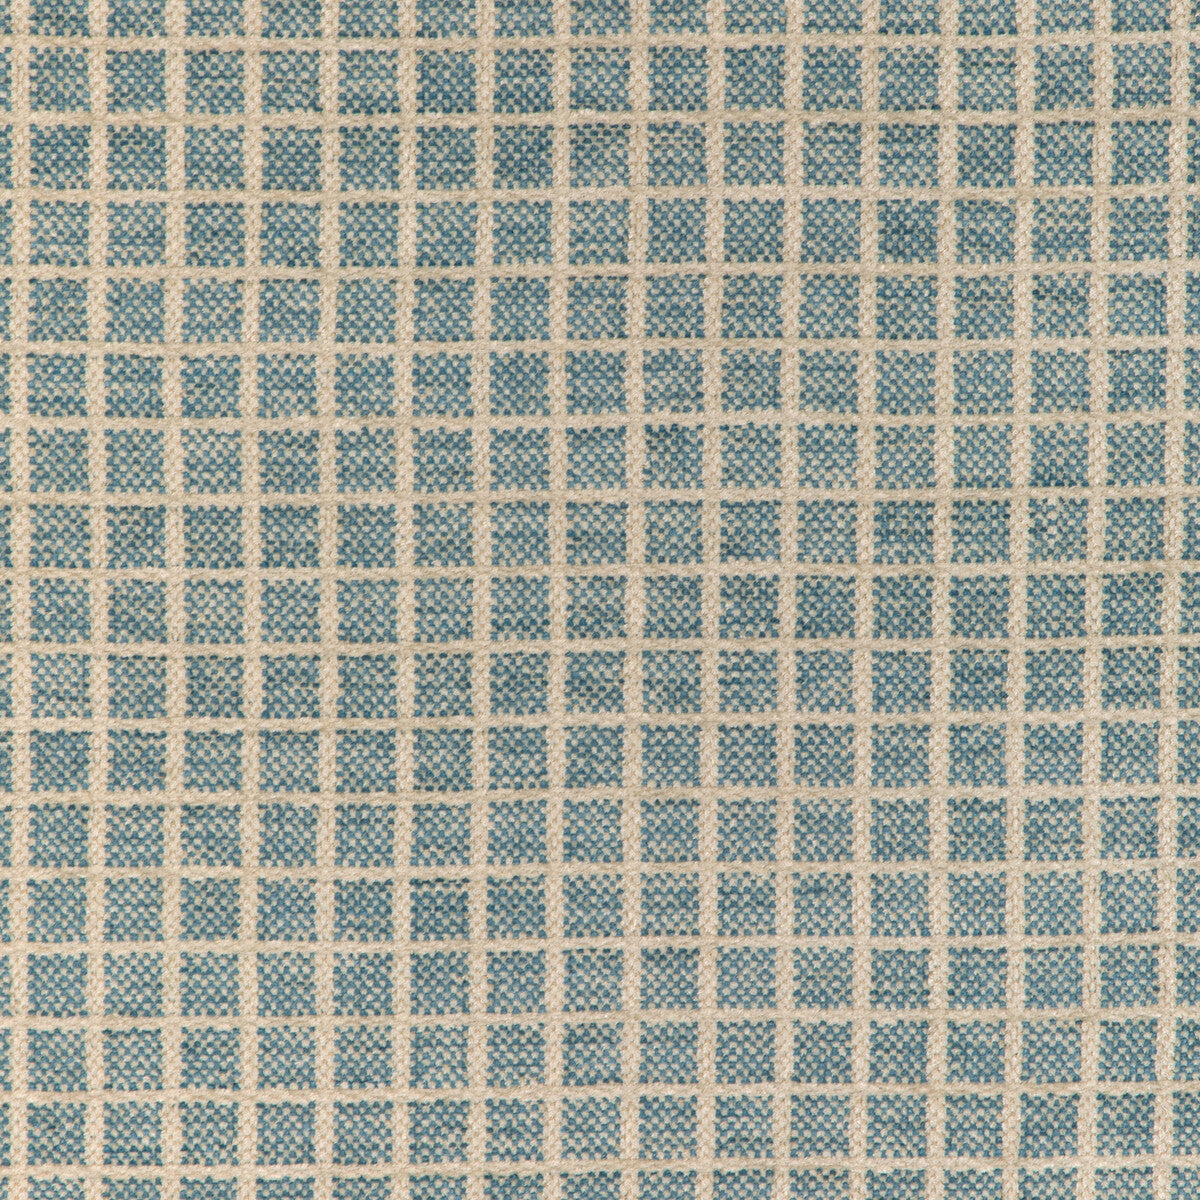 Chiron Texture fabric in sky color - pattern 8023155.1516.0 - by Brunschwig &amp; Fils in the Chambery Textures IV collection